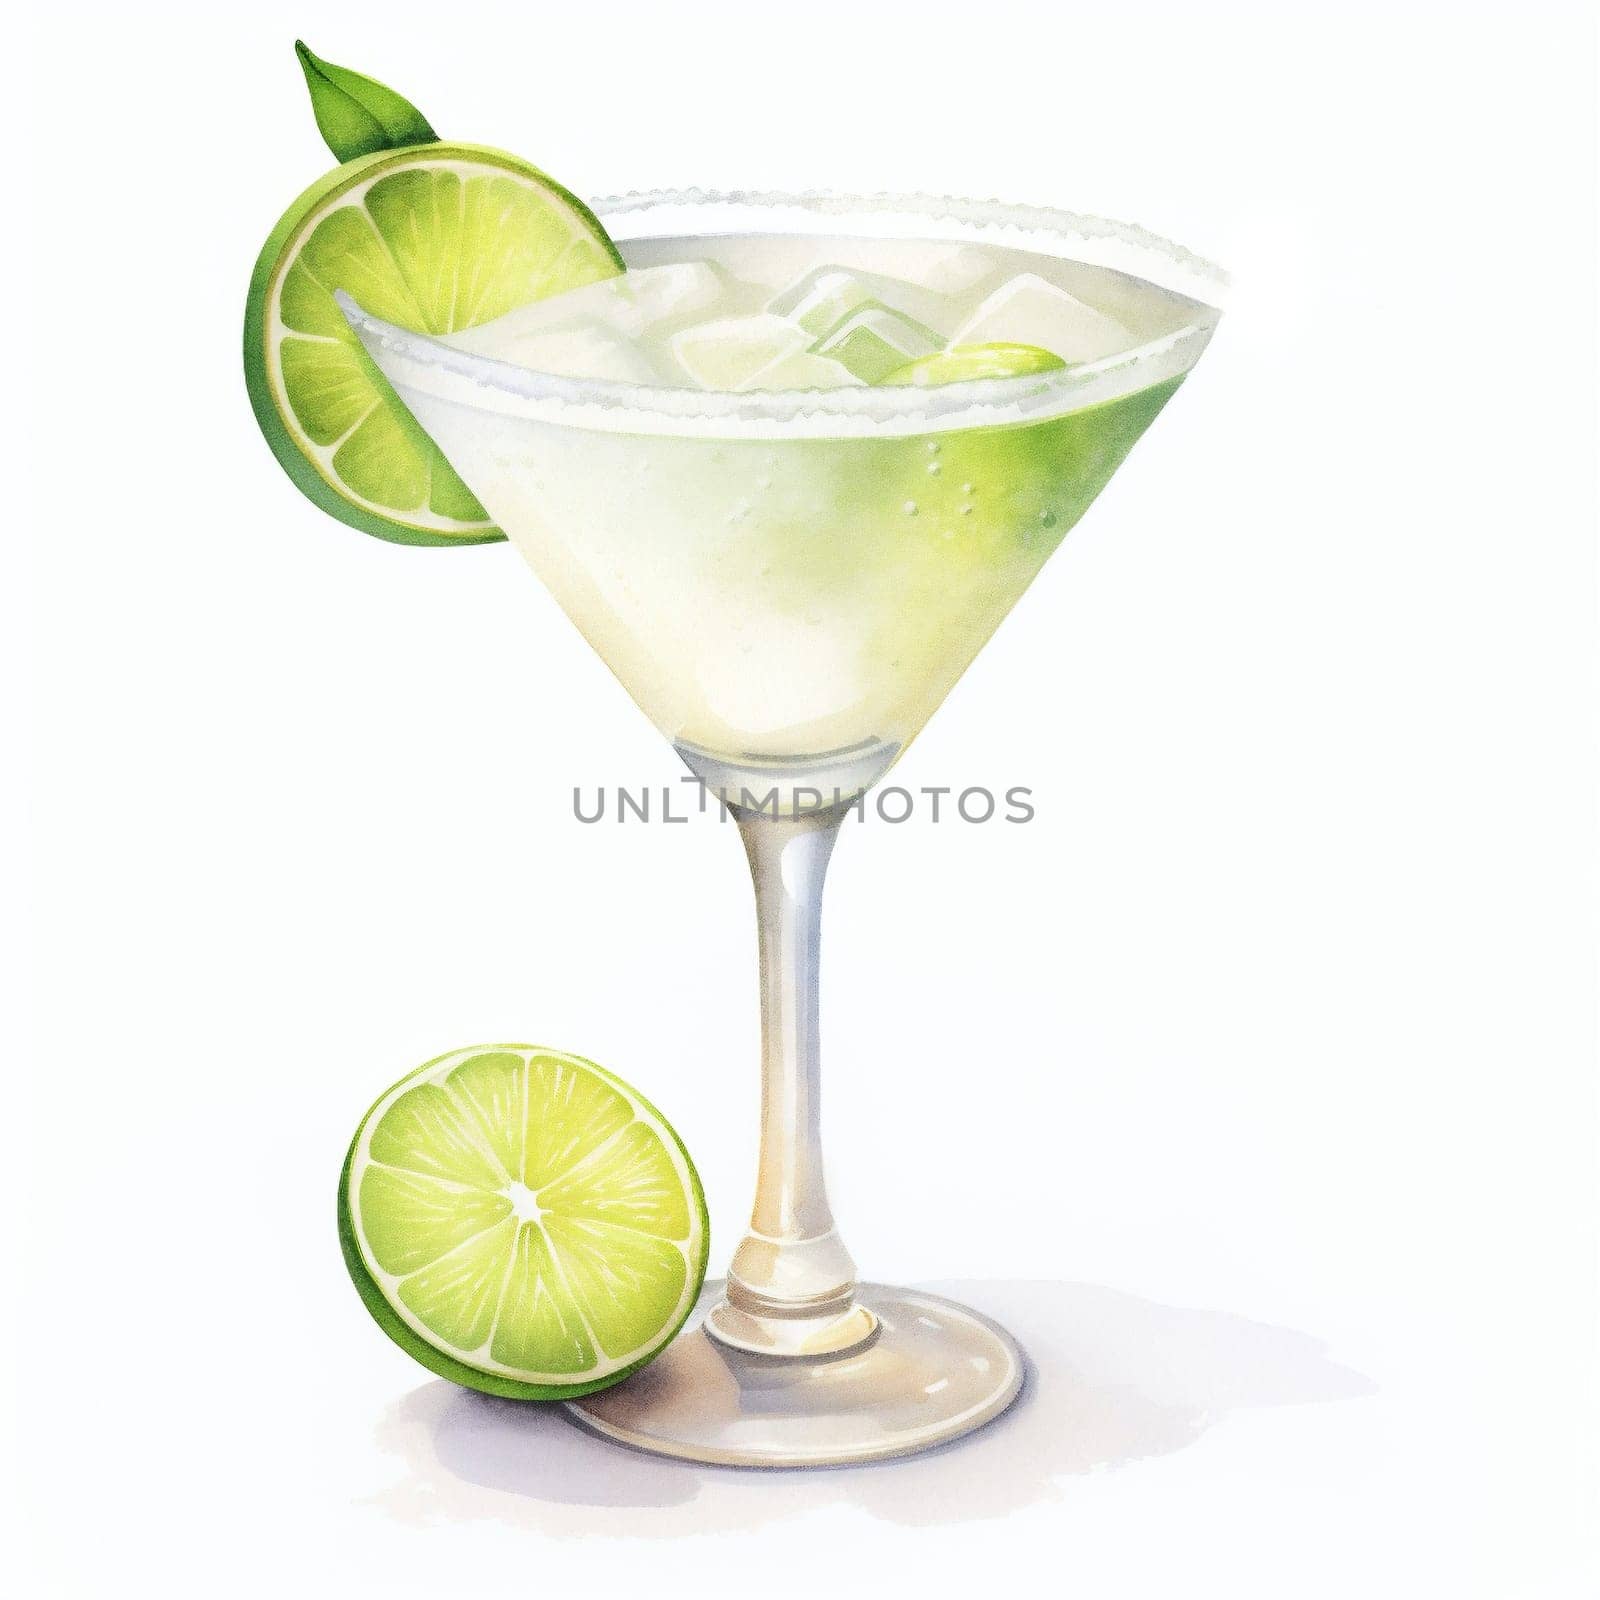 Margarita Cocktail Day with Lemon, Ice, Lemon Lime and Mint Leaves. Hand Drawn Coctail Day Sketch on White Background.